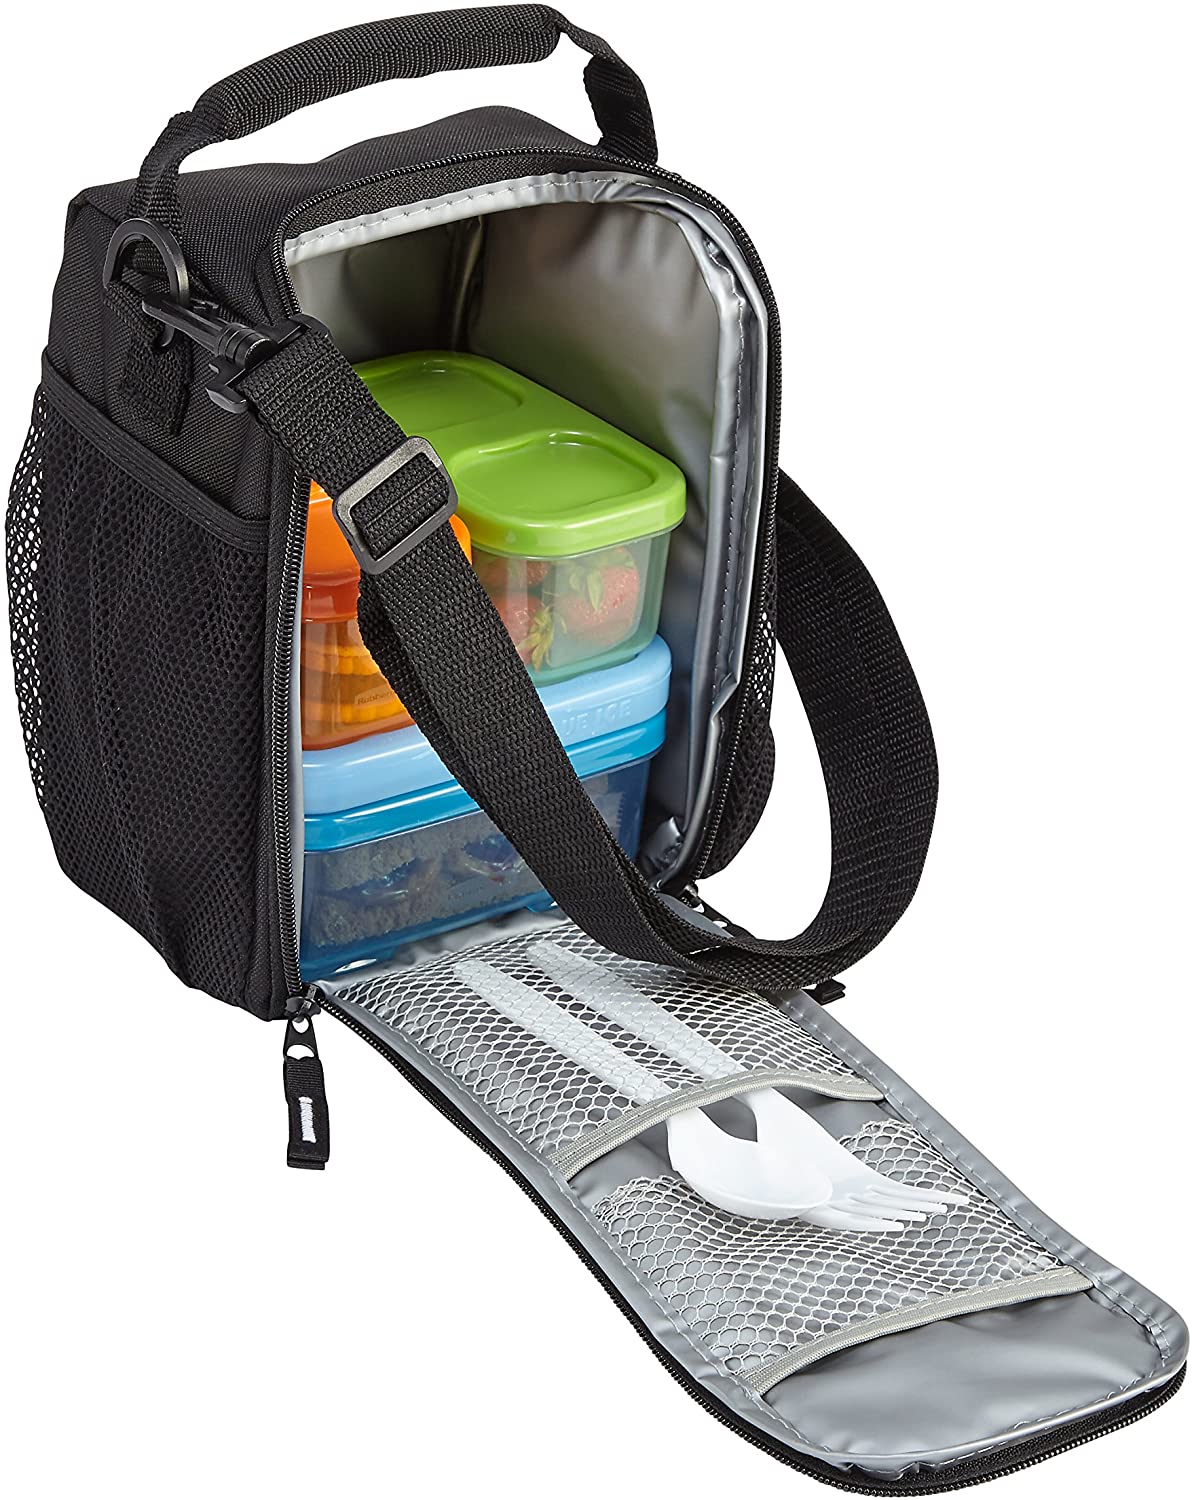 Rubbermaid LunchBlox Lunch Bag, Small, Black Etch - Whole and All